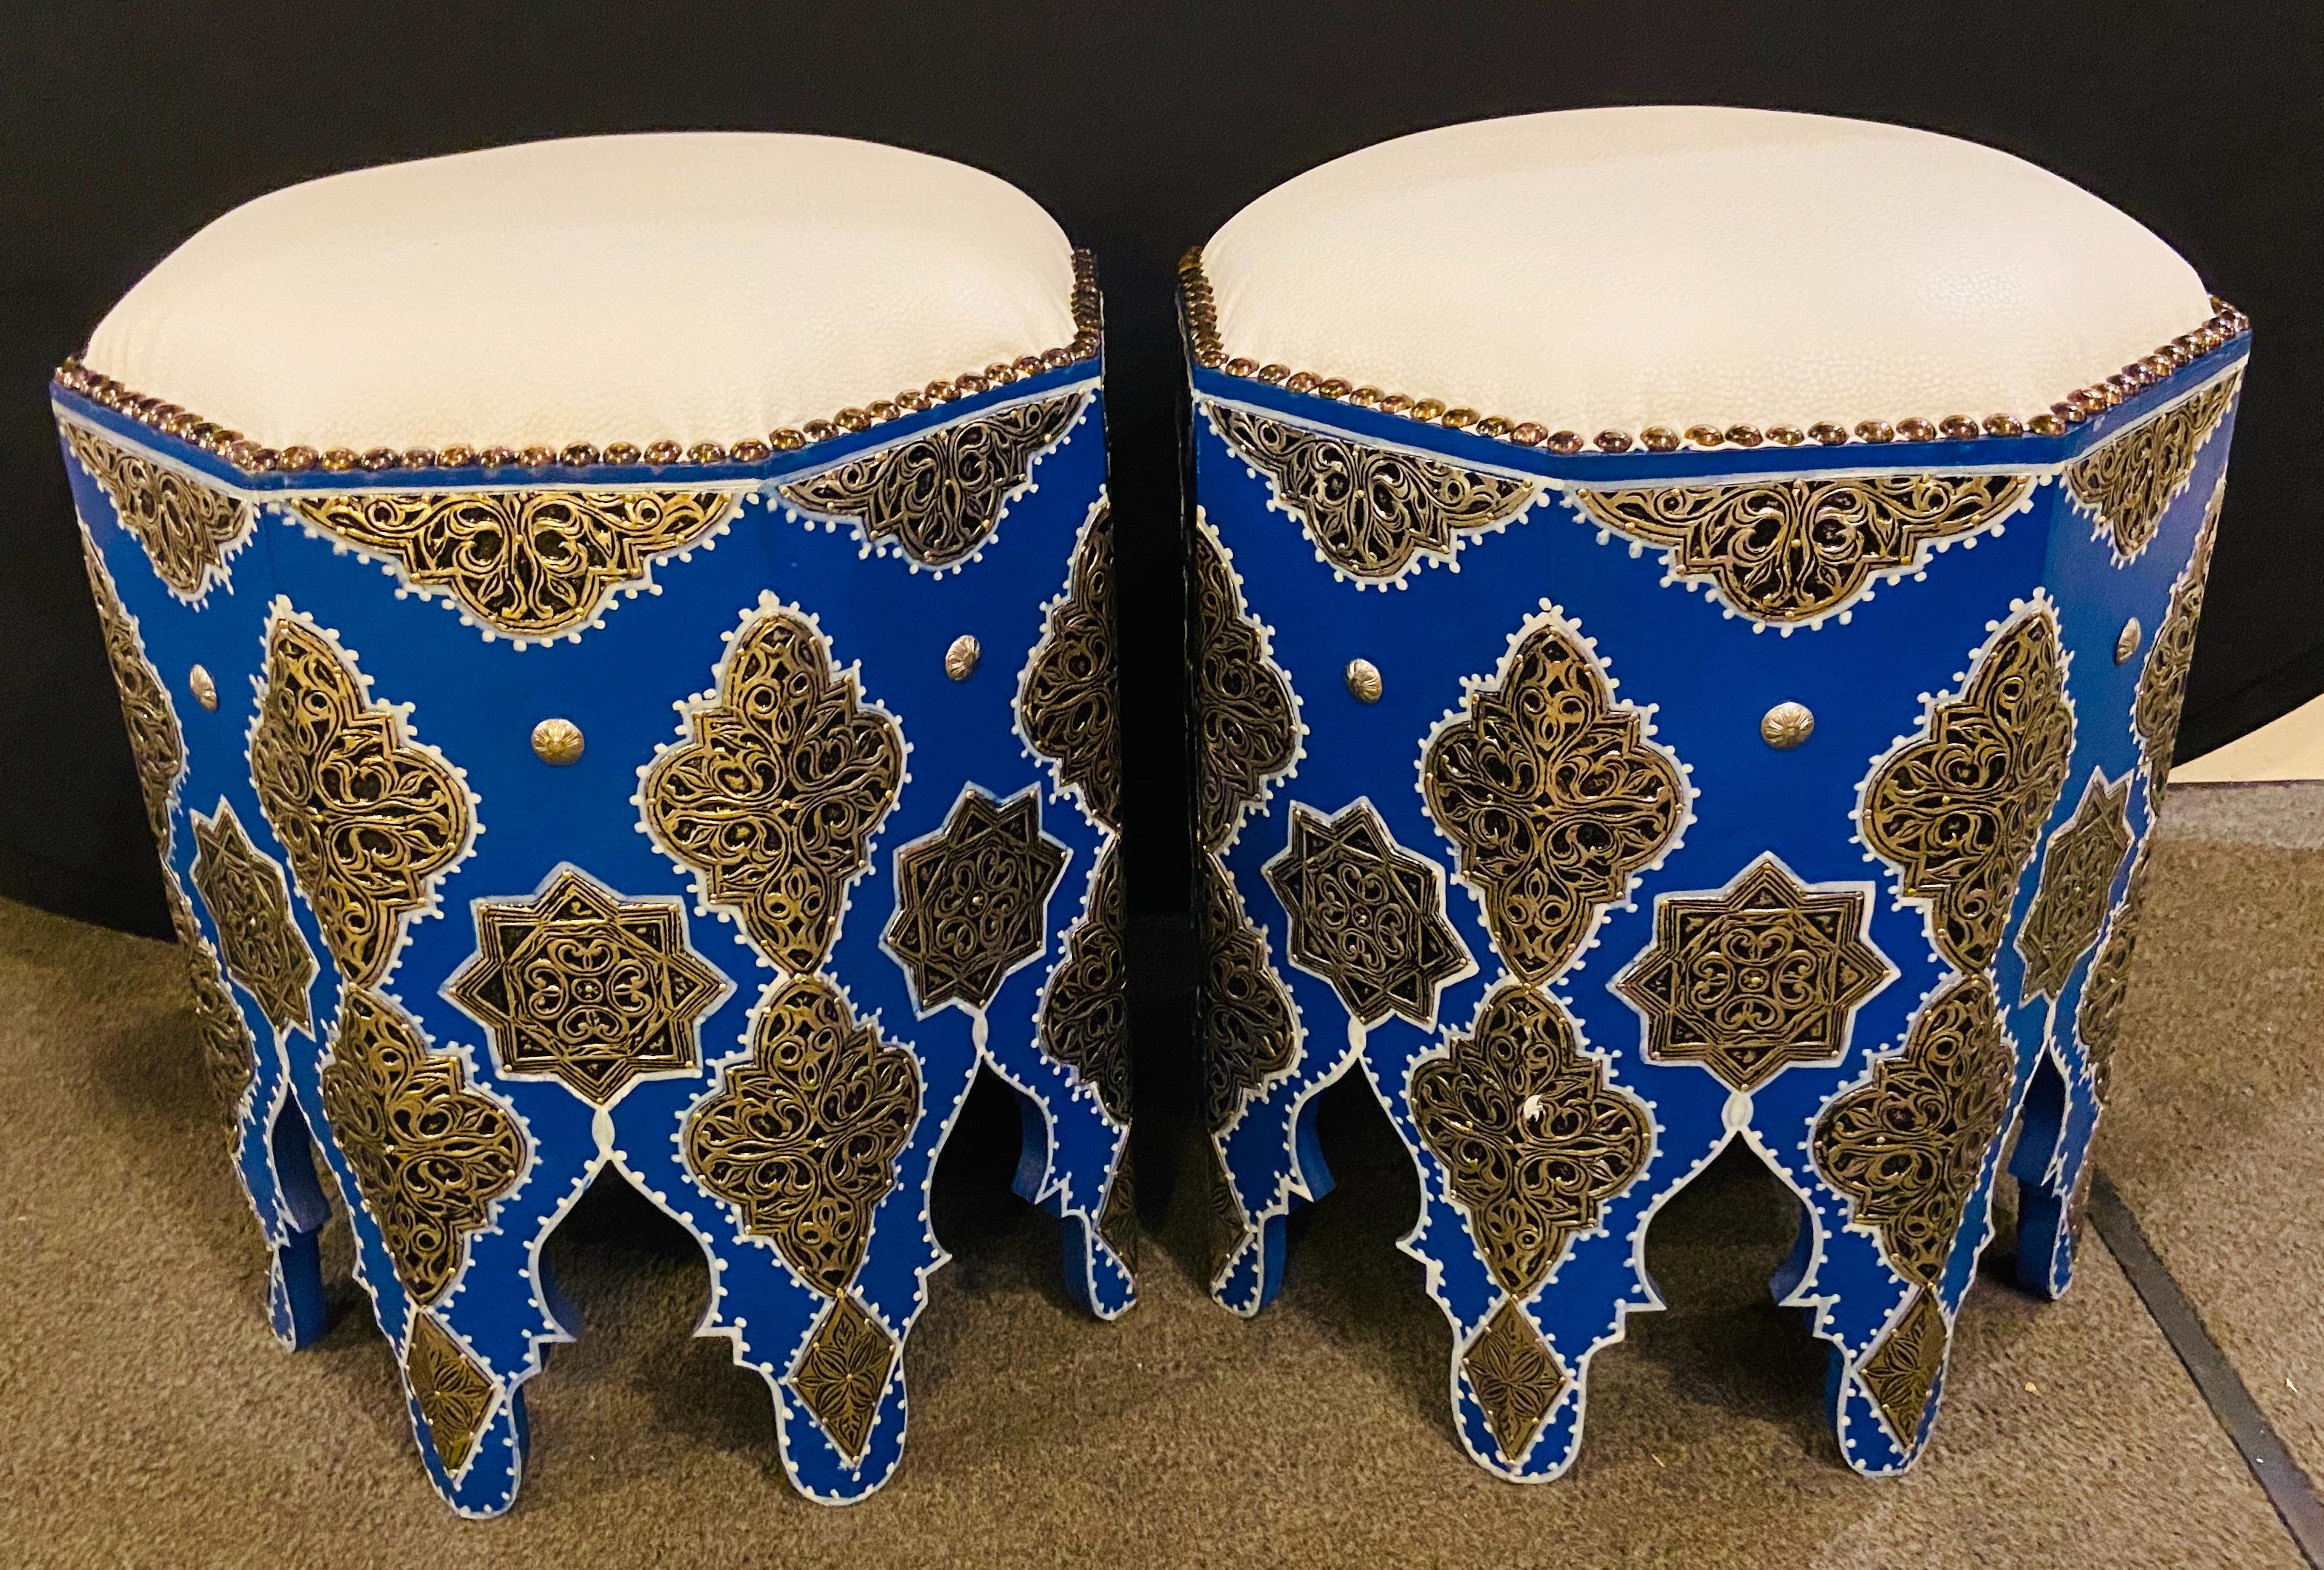 Boho Chic Moroccan Blue Majorelle Stool or Ottoman with White Leather Top, Pair In Good Condition For Sale In Plainview, NY